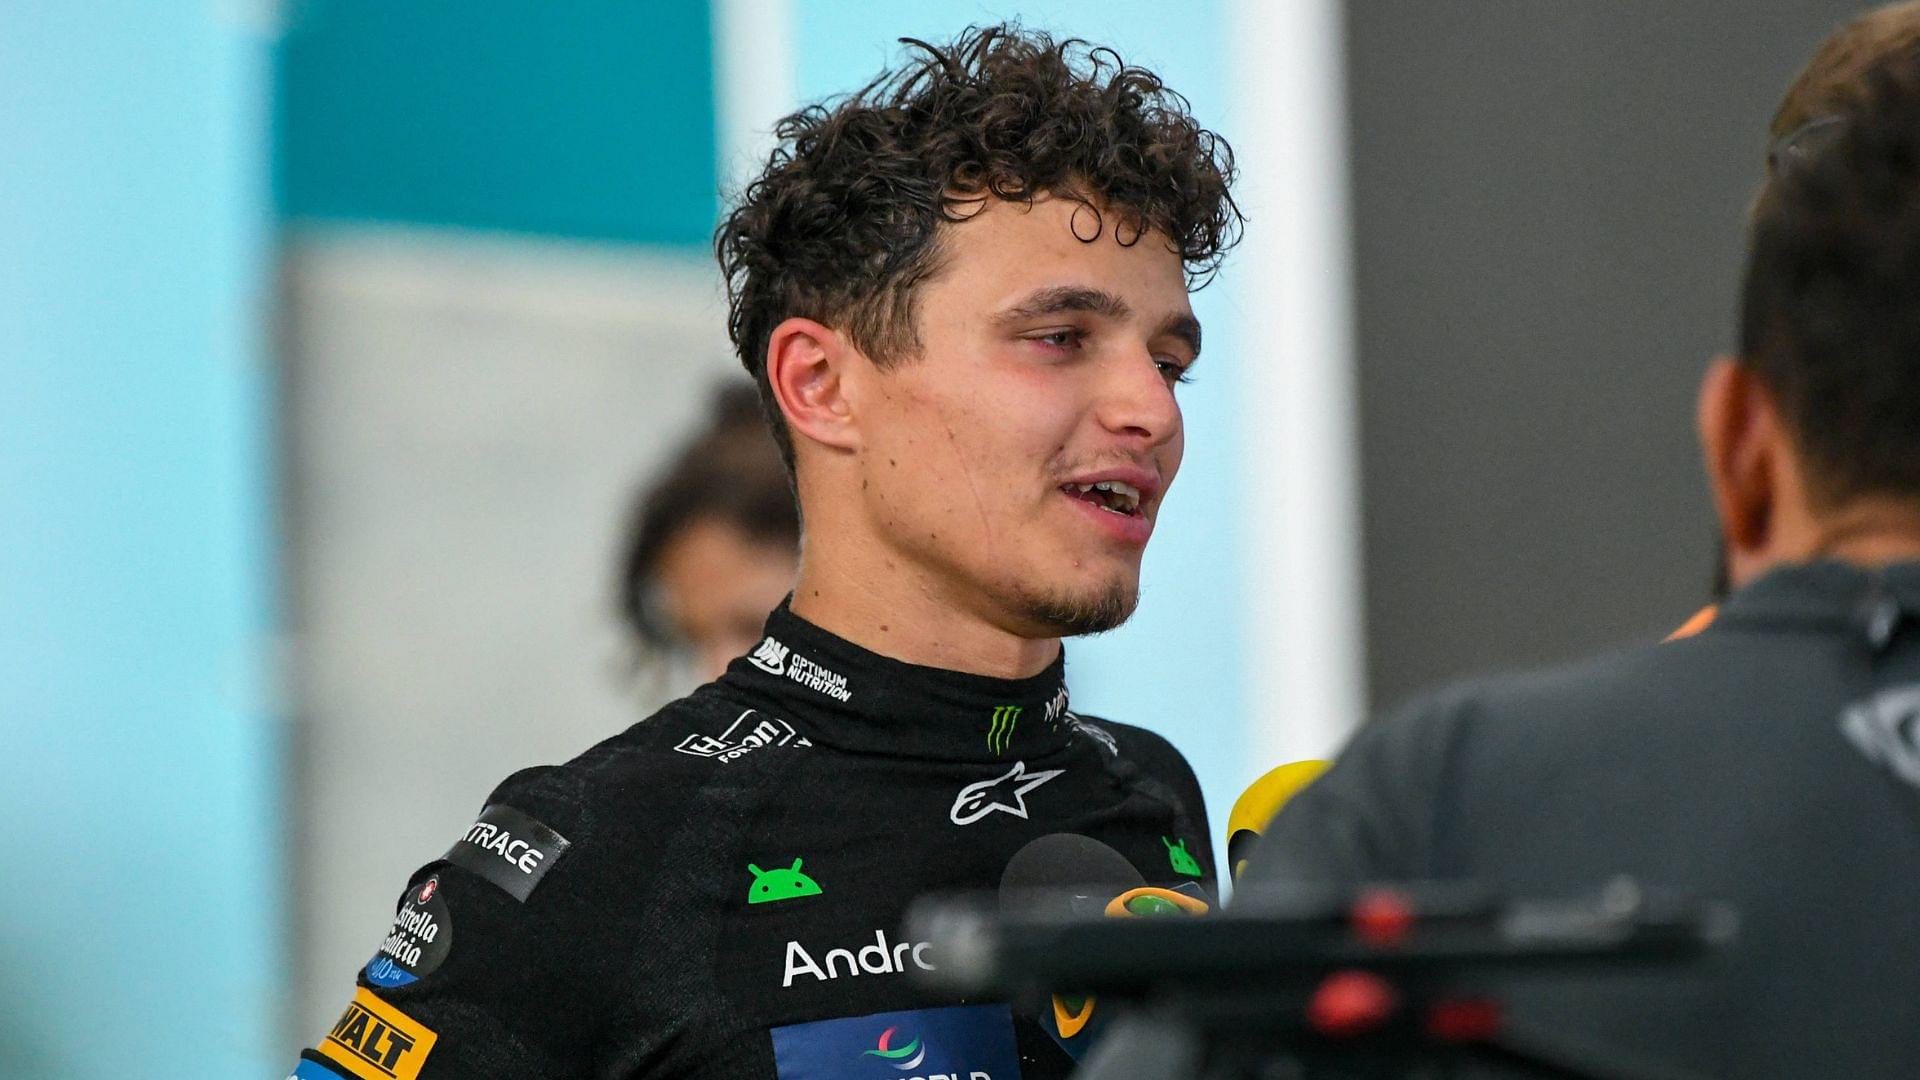 "Doesn't End Well": Lando Norris Will End Friendship With Max Verstappen, If That's What It Takes